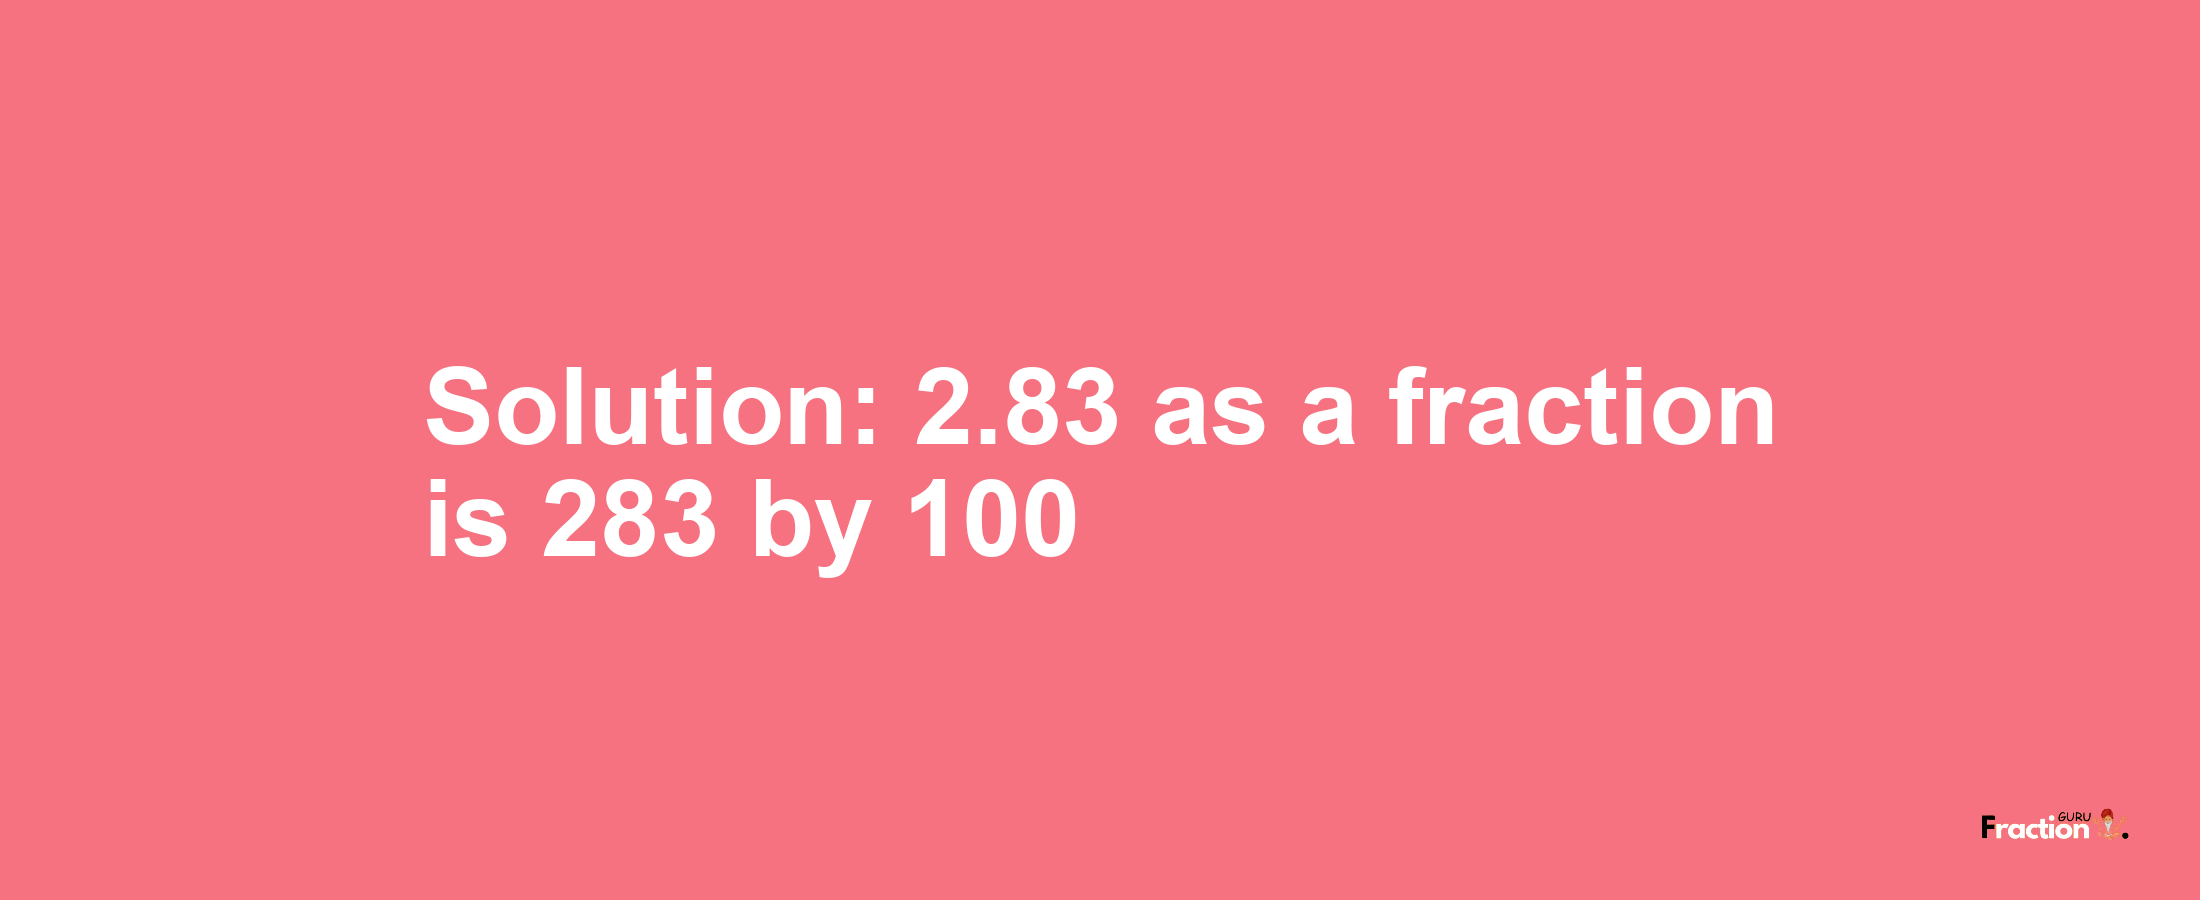 Solution:2.83 as a fraction is 283/100